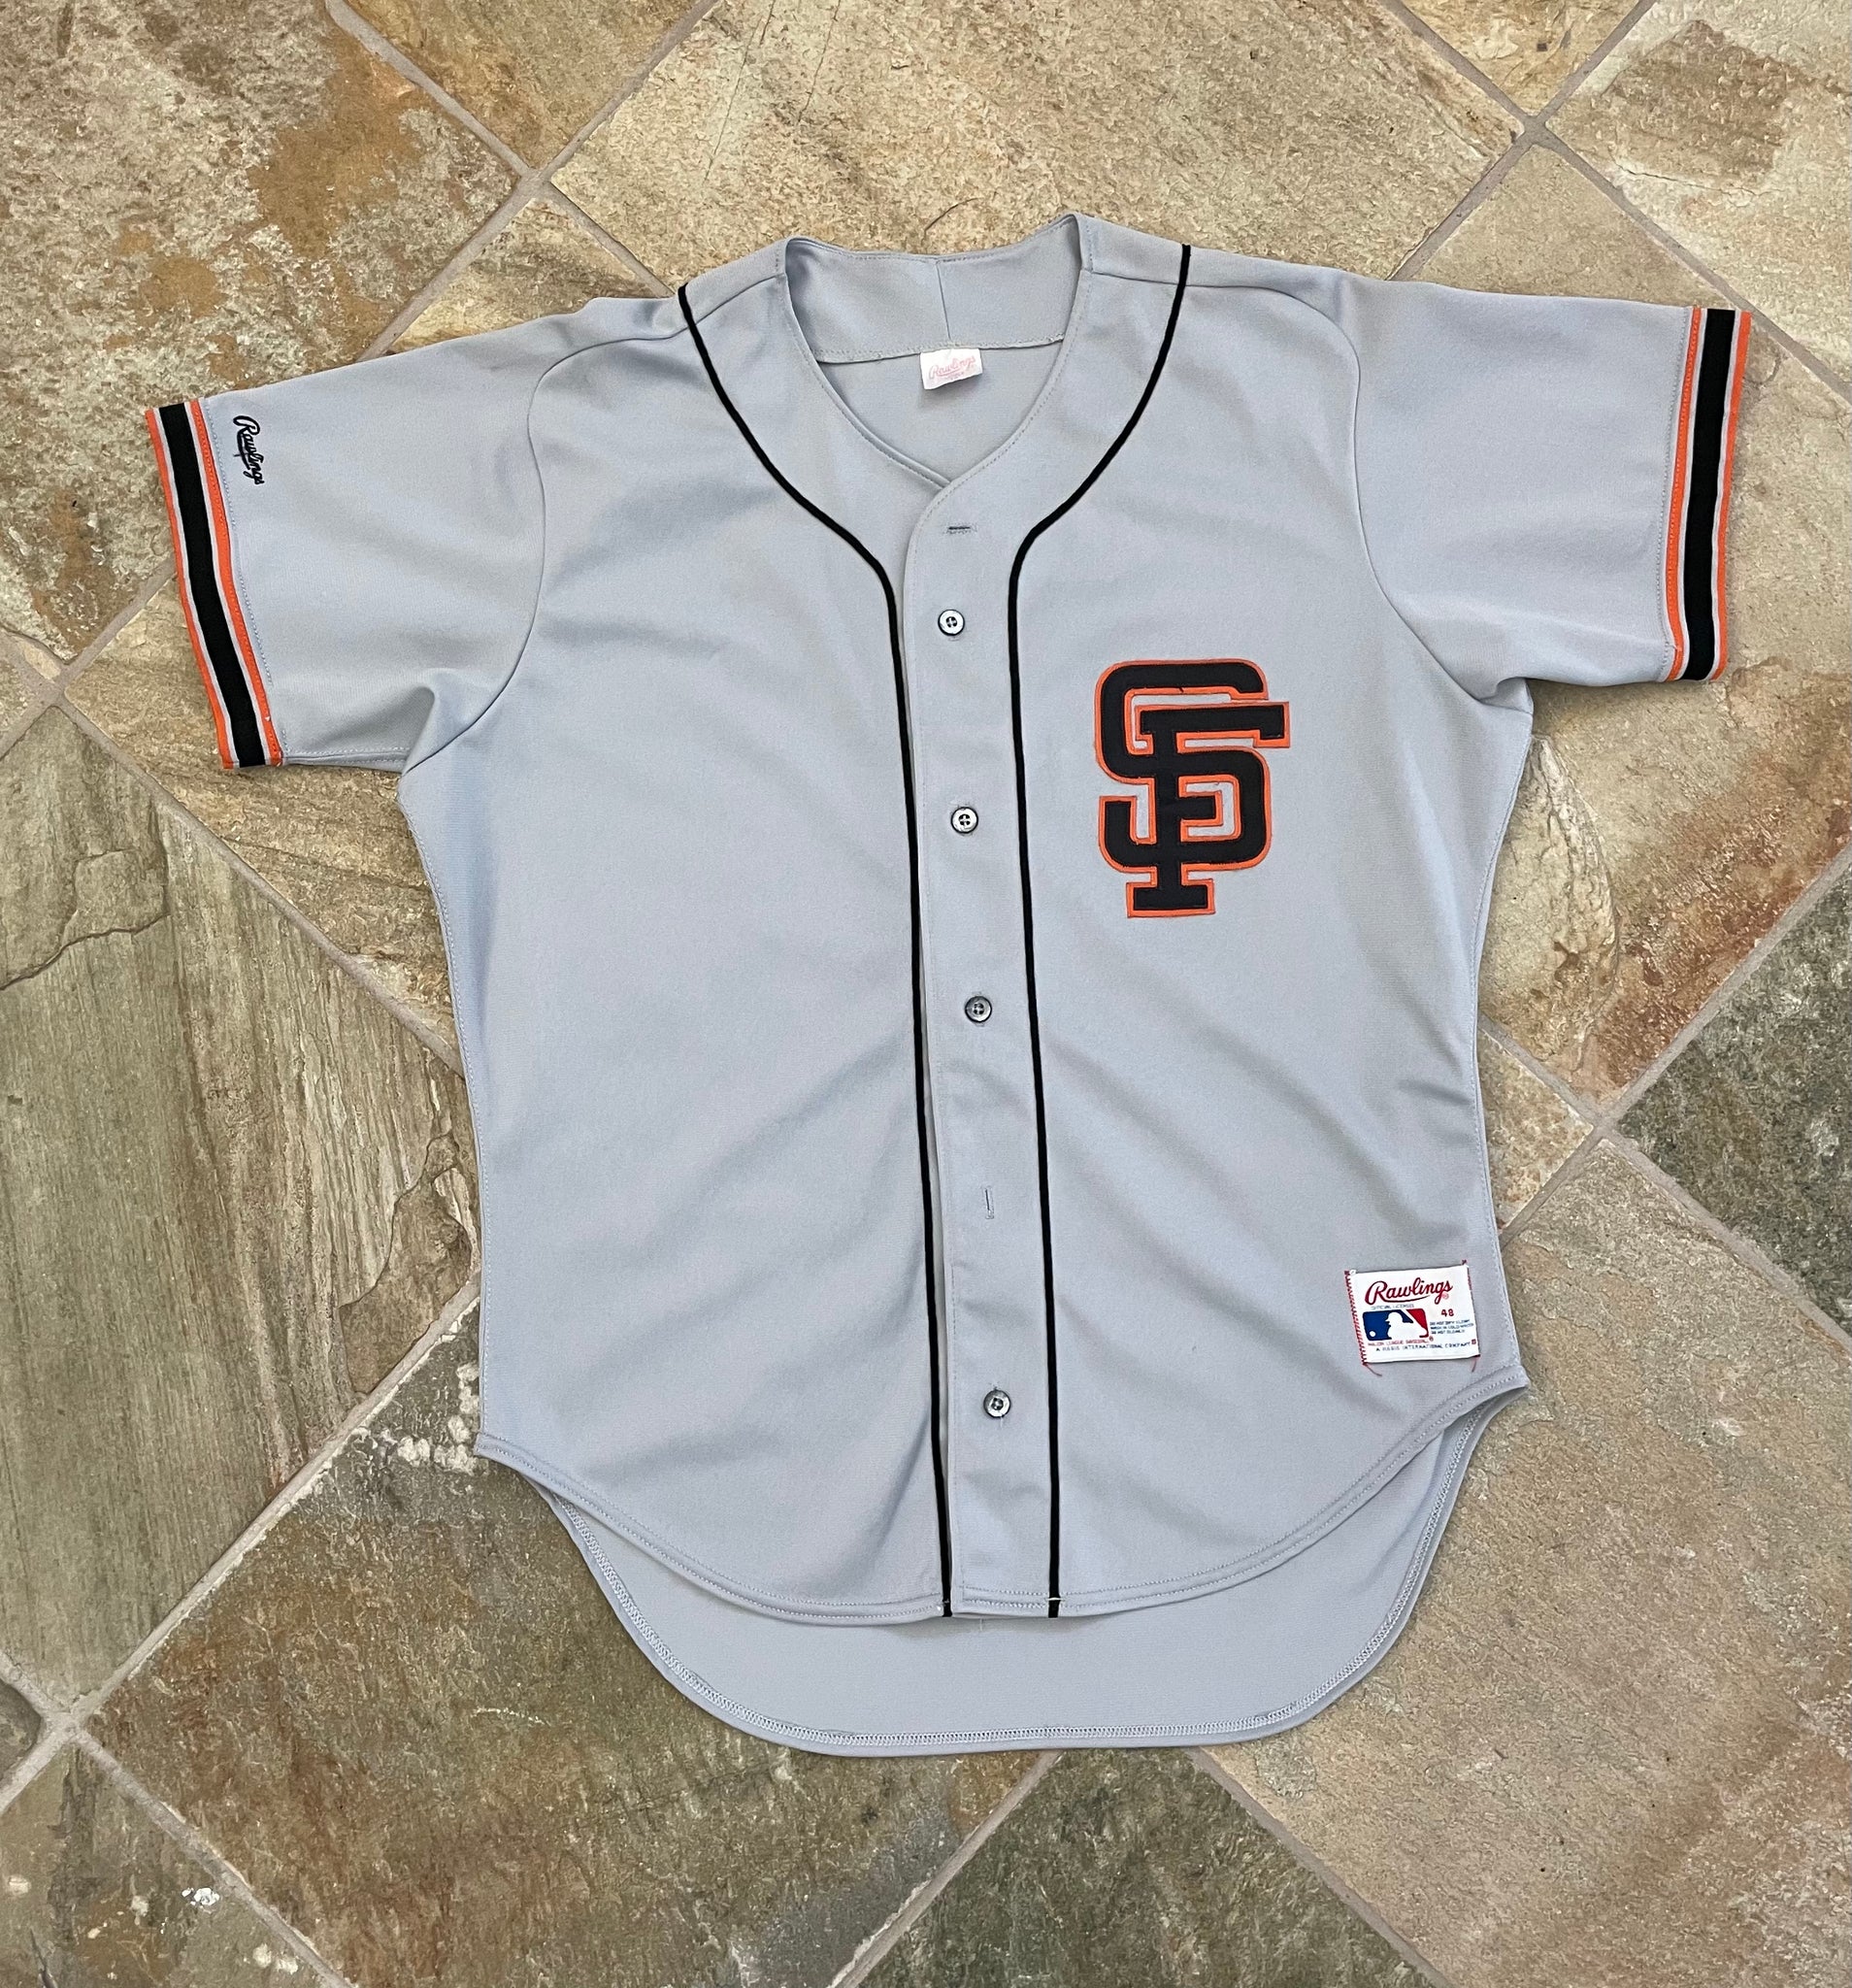 Rawlings 1991 San Diego Padres MLB Jersey ~ Size 40/42